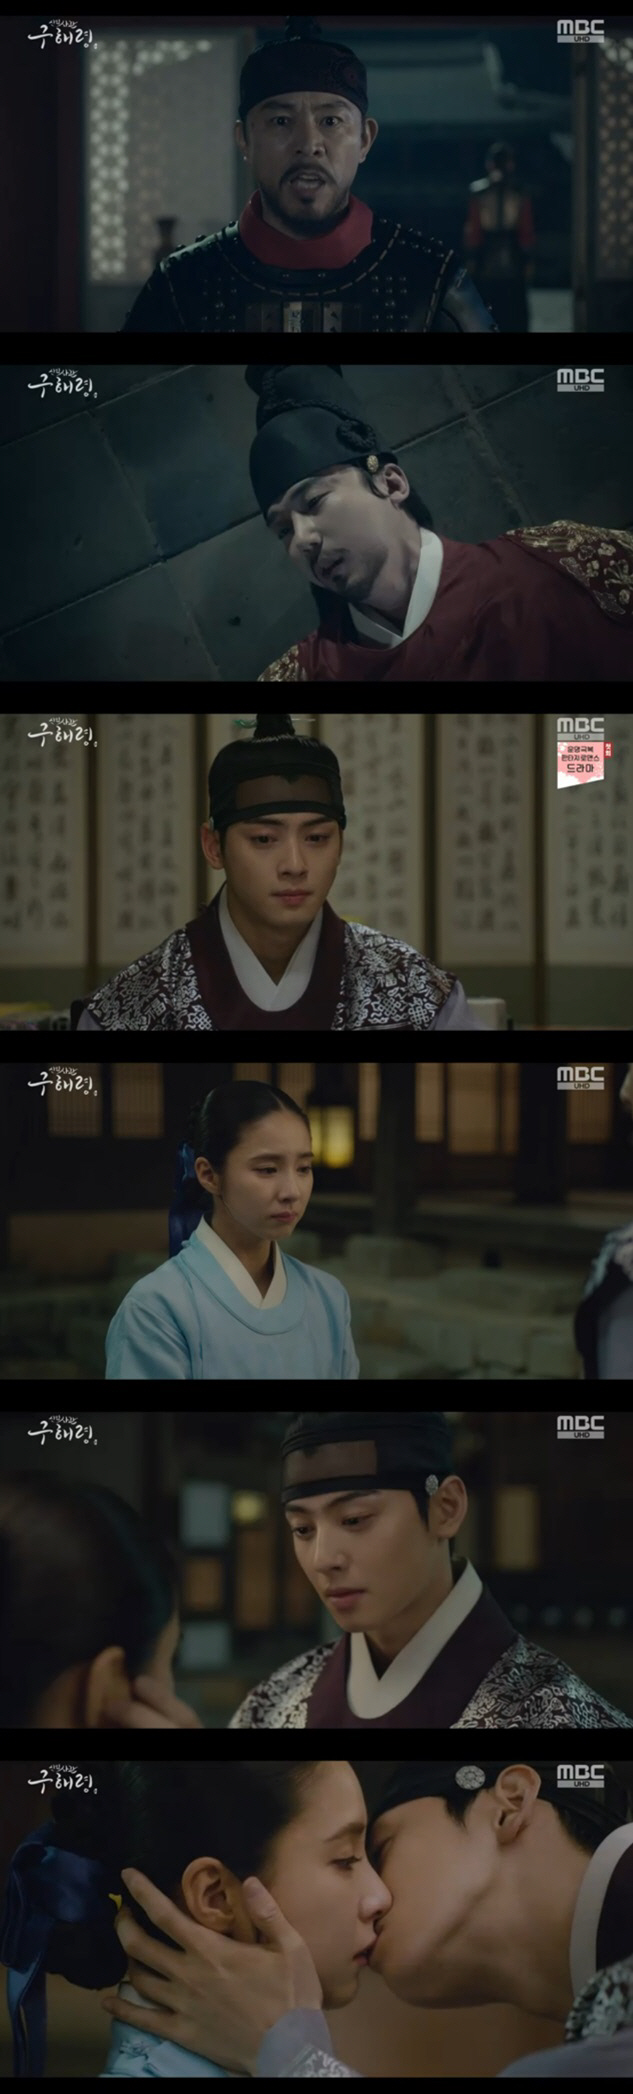 Na Hae-ryung, Shin Se-kyung and Cha Eun-woo drew Happy Endings.In the final episode of the MBC drama Na Hae-ryung, which was broadcast on the 26th, the scenes of Na Hae-ryung and Lee Lim (Cha Eun-woo) leaving for happiness were drawn.Na Hae-ryung raised the case 20 years ago to the surface by posting an appeal against Kim Il-mok Sacho.Lee also visited Lee Jin (Park Ki-woong) and asked him to reveal the truth, but Lee Jin not only turned away from it, but also locked him in the meltdown party, heightening tension.Twenty years ago, Lee and Jong-hoon (played by Yoon) confronted Min with a different political will, and Min and Pyong-pyeong used Koo Jae-kyung (played by Kong-hwan) to manipulate the secret and killed Lee and Kyong-hee by using a reverse motive.Na Hae-ryung, who was unable to meet with Lee Lim, went to inform him that he had found Kim Il-moks head behind the front plate of the meltdown.But Min Ik-pyeong was plotting to eliminate Irim this time.He said, Is not the remnants of Seoraewon have a futile hope because the enemy of the Hwangju Heeyoung is alive? He said, Before the banquet, Daewon Daegun will disappear from the world.In fact, while Irim was sleeping, someone tried to break into the melted party, and Irim was nervous and threatened with life.Na Hae-ryung secretly took Irim out and made him meet with the mother-of-pearl (Jeon Ik-ryeong), who told Irim, I want to finish everything at a banquet to be held a few days later, but things may go wrong.Mama must be safe, no matter what. If we dont come back, well be here immediately. Irim and Na Hae-ryung were on the verge of breaking up; Na Hae-ryung told Irim that I will be by Mama but Irim said, You live your life.My whole life was a time to wait for you to come to me. I can endure it if I think Im waiting for the day I meet you someday. Since then, the two have kissed each other with a tearful kiss.Finally, a banquet was held, but suddenly, the person who changed the letter of the king, Koo Jae-kyung, knelt before the king and said, The secret of the king was forged.In the past, he received the name of the people and wrote false contents in the letter. All the charges of the abolition were the frame of the people. He asked, Kill the people who caused the tragedy that can not be washed in this Europe with God.In response, Mr. Lim (Kim Yeo-jin) also expressed his true color toward Min-ik-pyeong, saying, Get the life of this old man.And Irim appeared and declared, I am no longer Daewon, I am the son of Hee Young-gun Lee.He said to the King, For the past 20 years, you have been able to kill me.I knew that the King was wrong, so I was the enemy of the king, so I did not live until this time. In response, Hamyoung-gun Lee Tae (Kim Min-sang) expressed his anger and told his officers to stop the brush, but Na Hae-ryung knelt down next to Irim and stood upright with the brush.Na Hae-ryung said, Even if you cut me, the essay will not stop. There will be another officer in this place where I died.Even if the King kills all the officers on this land, he can not stop it. That is the power of truth. Then Na Hae-ryung, along with Lee Lim, the officers of the presbytery also joined together.With a bloody tension, Lee Jin (Park Ki-woong) also appeared before the King, saying: True loyalties do not block the eyes and ears of the King; you still dont know.The man who harms the Kings Europe is a public opinion. Please listen to the Taoyuan army and the officers. If there are those who have sinned, punish them. In the end, a government office was held to punish those who participated in the opposition. All those involved, including the public opinion, will be punished with reasonable punishment.At this time, Irim appeared in front of Mr. Dae-im and said, Please close me. The place is not mine.I want to live as myself, not as a son of anyone now. But Mr. Chai Lim did not allow it.Na Hae-ryung comforted Irim, saying, Lets think were turning over the bookcase, its not over, its another story starting.Three years later, Na Hae-ryung still lived his life as a cadet.And as soon as Irim, who became a free body, returned from Hanyang, he continued his romance in search of Na Hae-ryung.